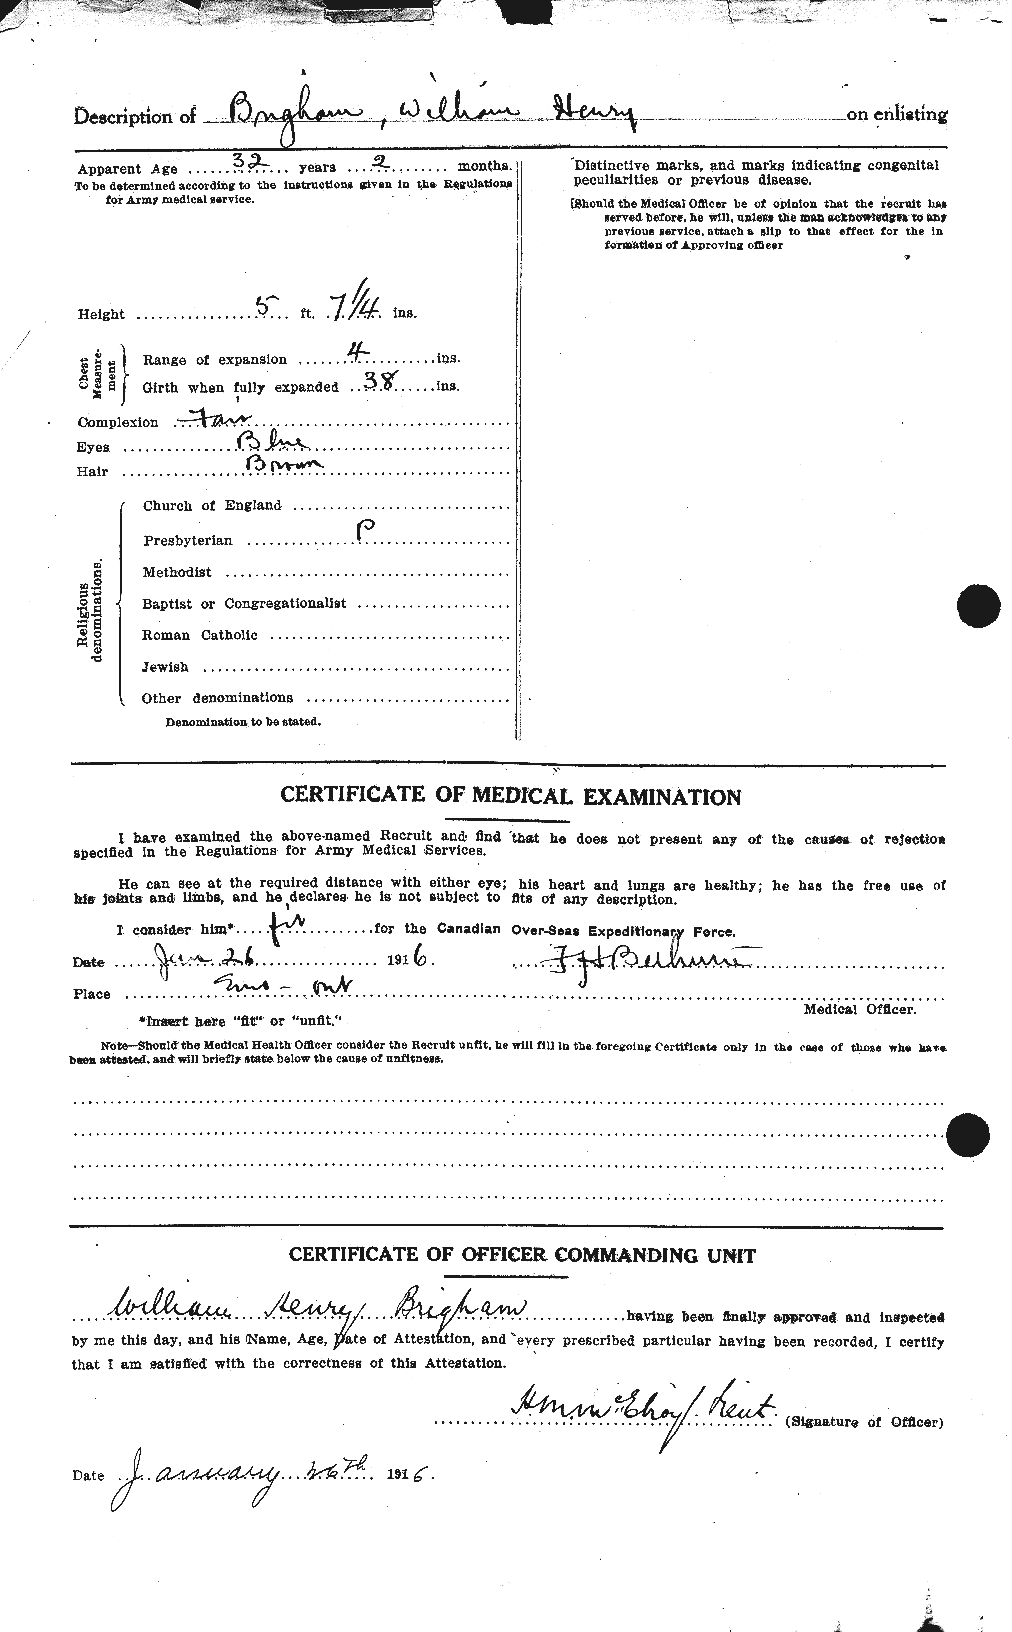 Personnel Records of the First World War - CEF 264141b